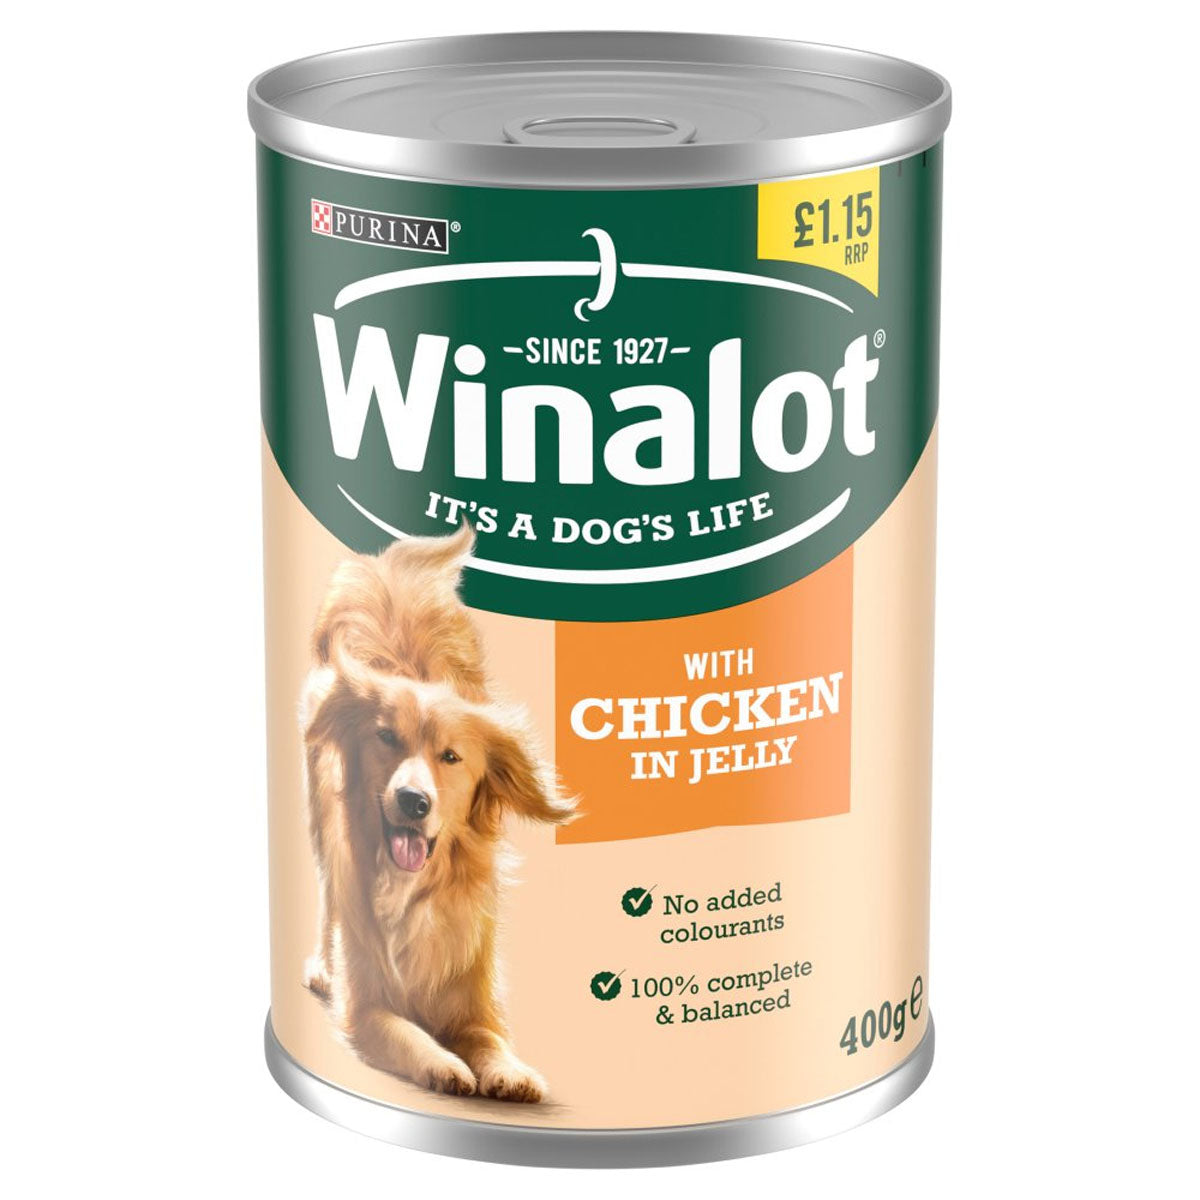 Purina Winalot - With Chicken in Jelly - 400g - Continental Food Store